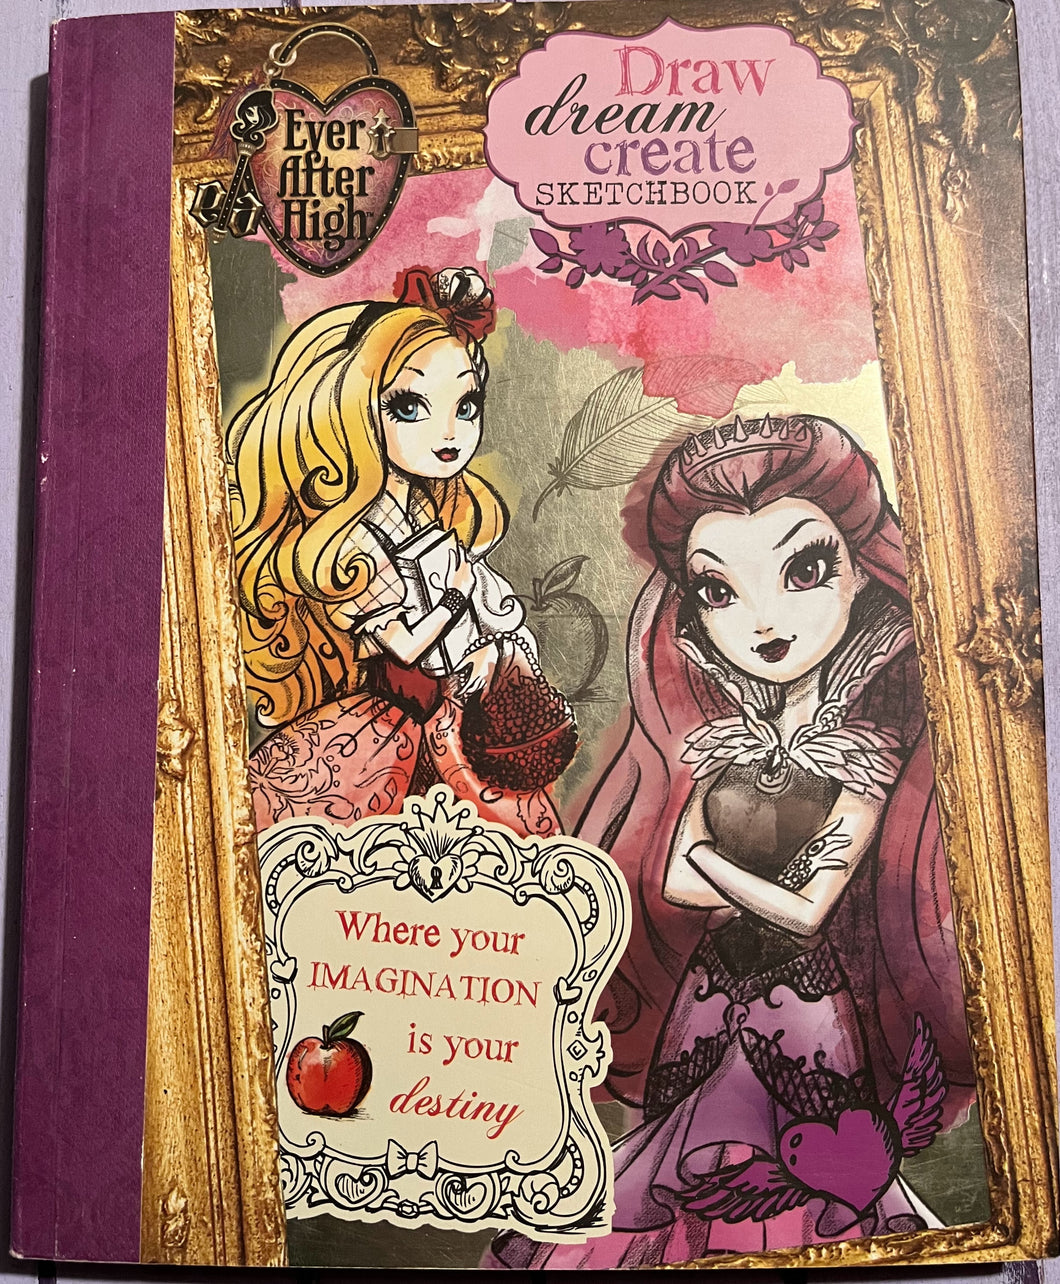 Ever After High - Draw, Dream, Create Sketchbook